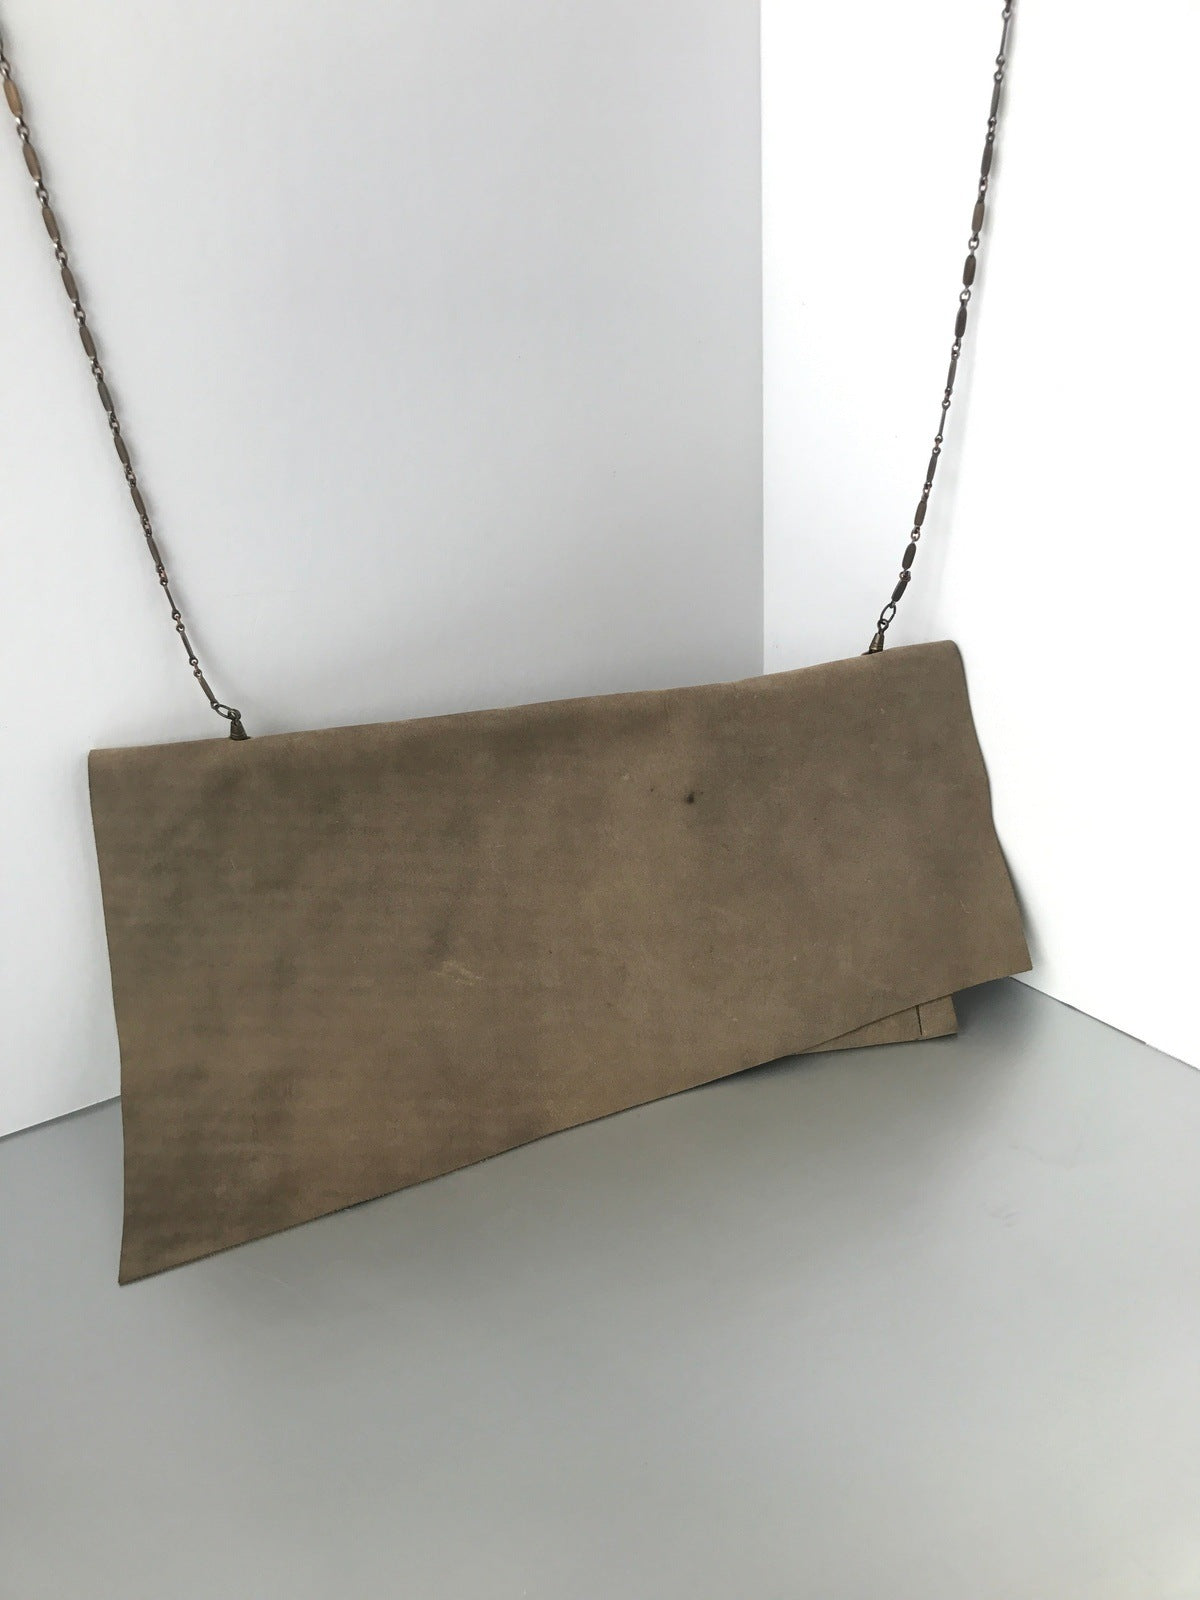 Gilbert & Leona Abstract Suede Bag Handmade Vintage Accessory